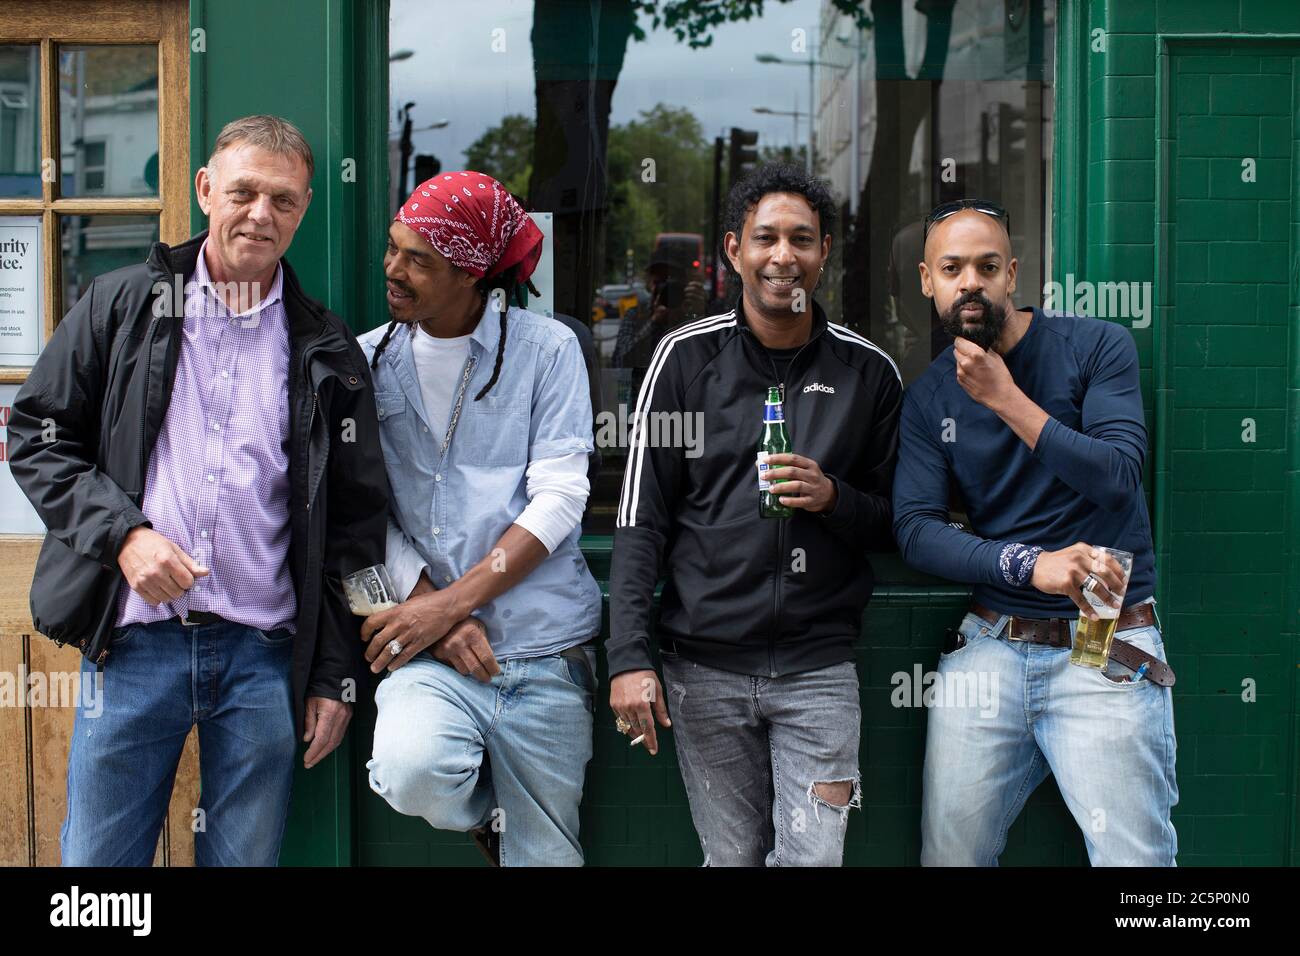 Peckham, England. 4th July 2020. Four men enjoy a drink outside their local pub, The Nags Head, in Peckahm following the British Governments announcement to ease the lockdown rules. Pubs, bars and restaurants reopen today having been closed for over three months in the UK due to the coronavirus pandemic. (photo by Sam Mellish / Alamy Live News) Stock Photo